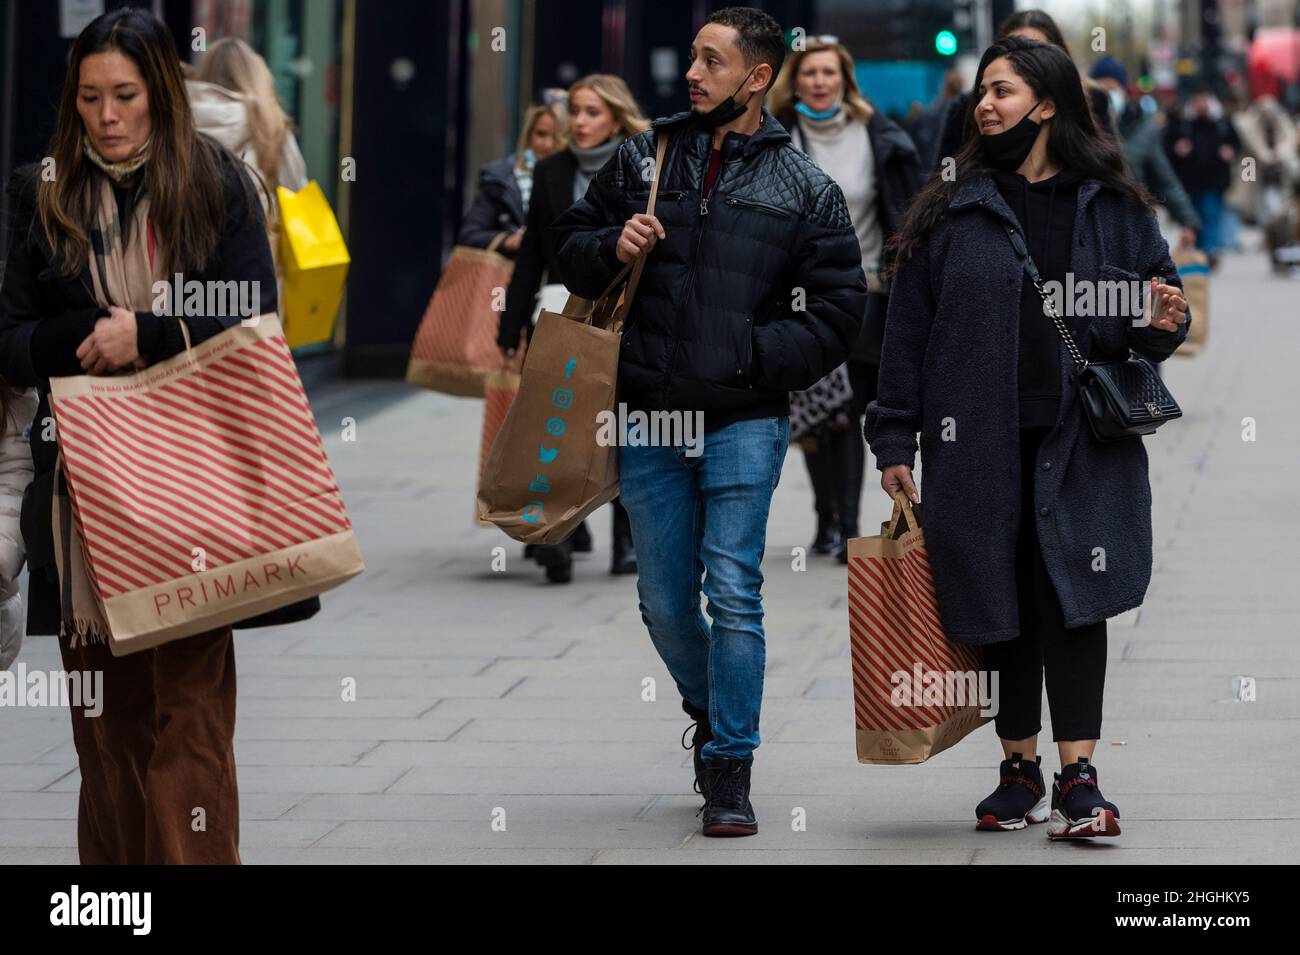 London, UK. 21st Jan, 2022. People with Primark shopping bags in Oxford Street. The retailer has announced that rather than put prices up, 400 mainly retail manager jobs would be lost as the store reacts to rising costs. Credit: Stephen Chung/Alamy Live News Stock Photo